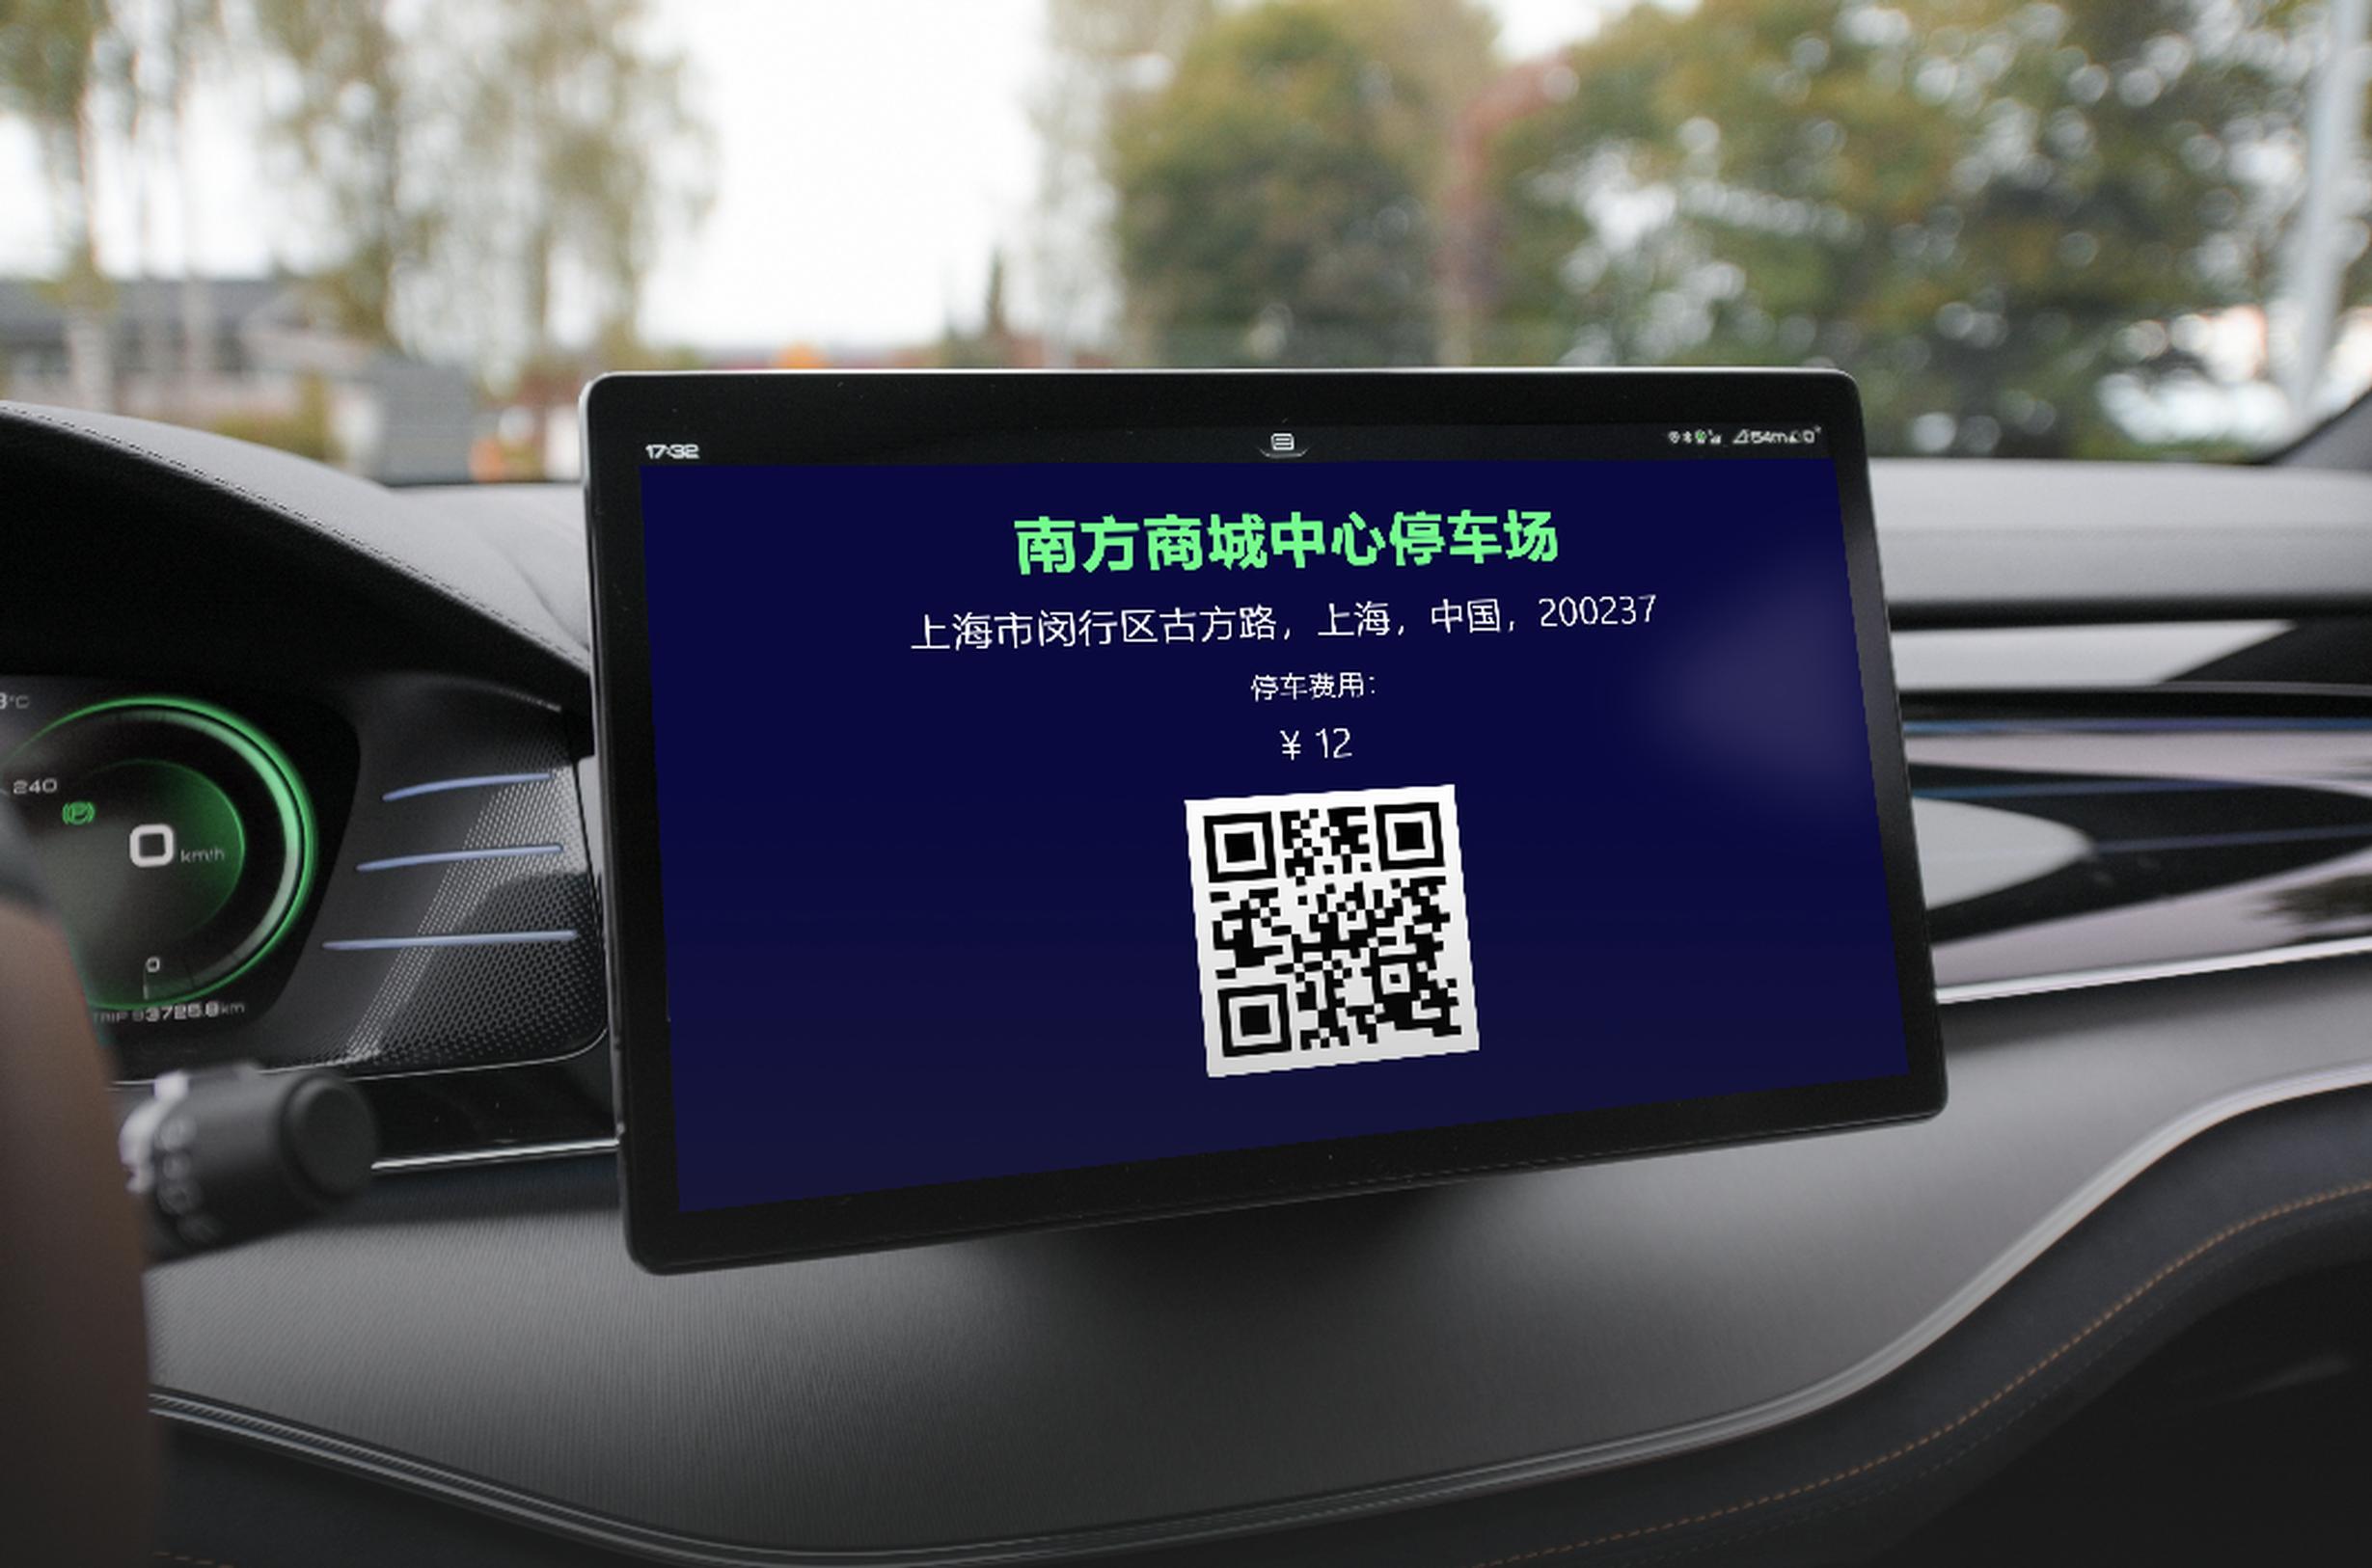 Parkopedia and Desay provide parking services to Chinese car makers